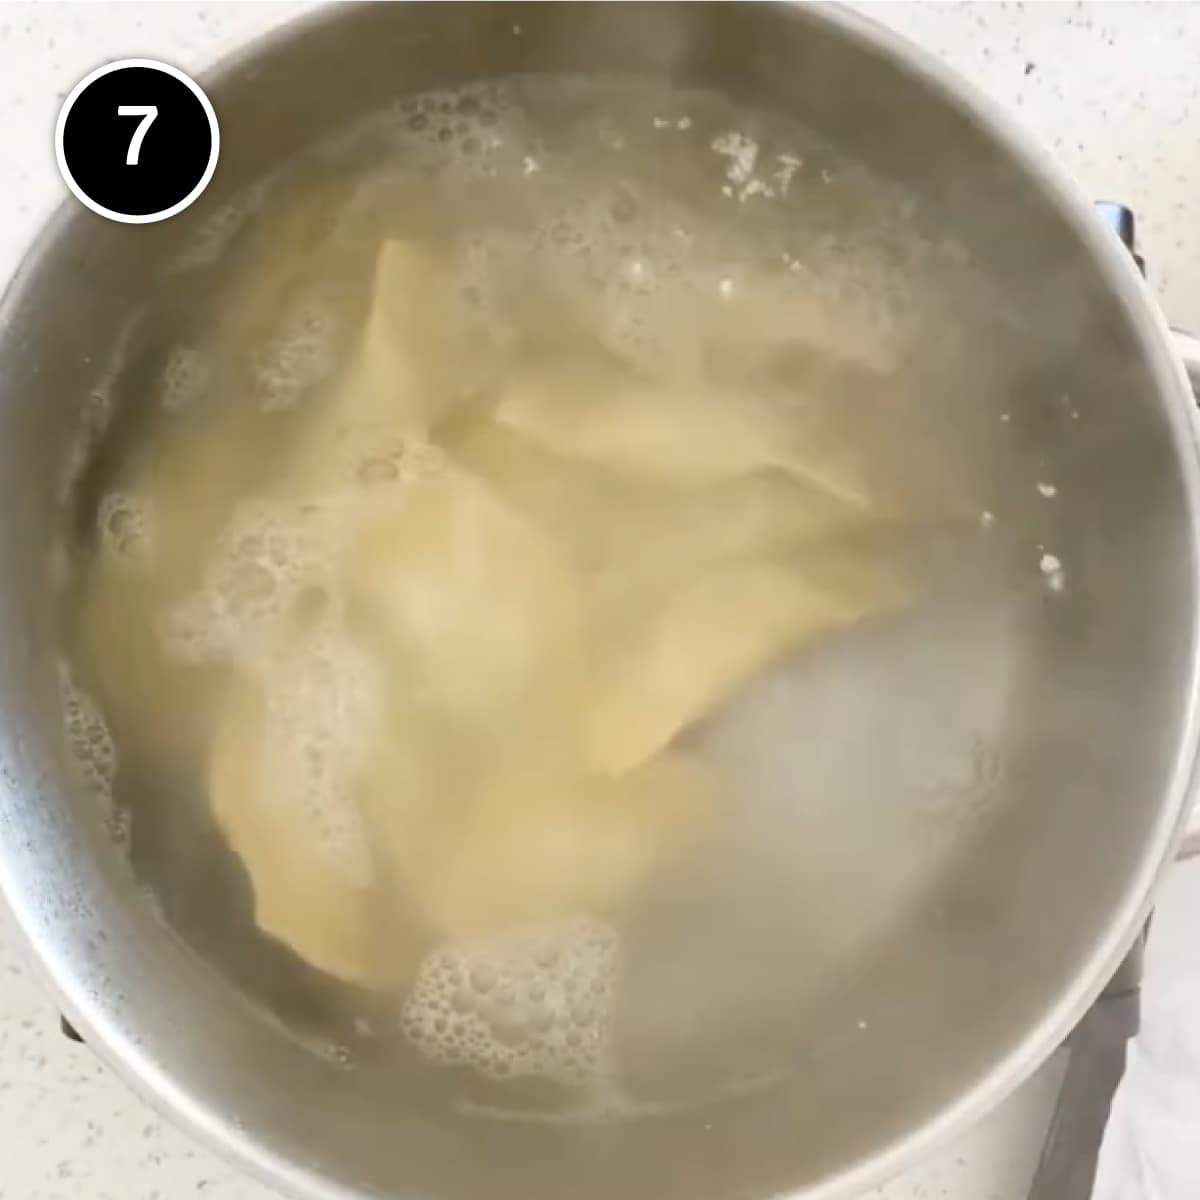 Mezzelune pasta cooking in a pan of water.